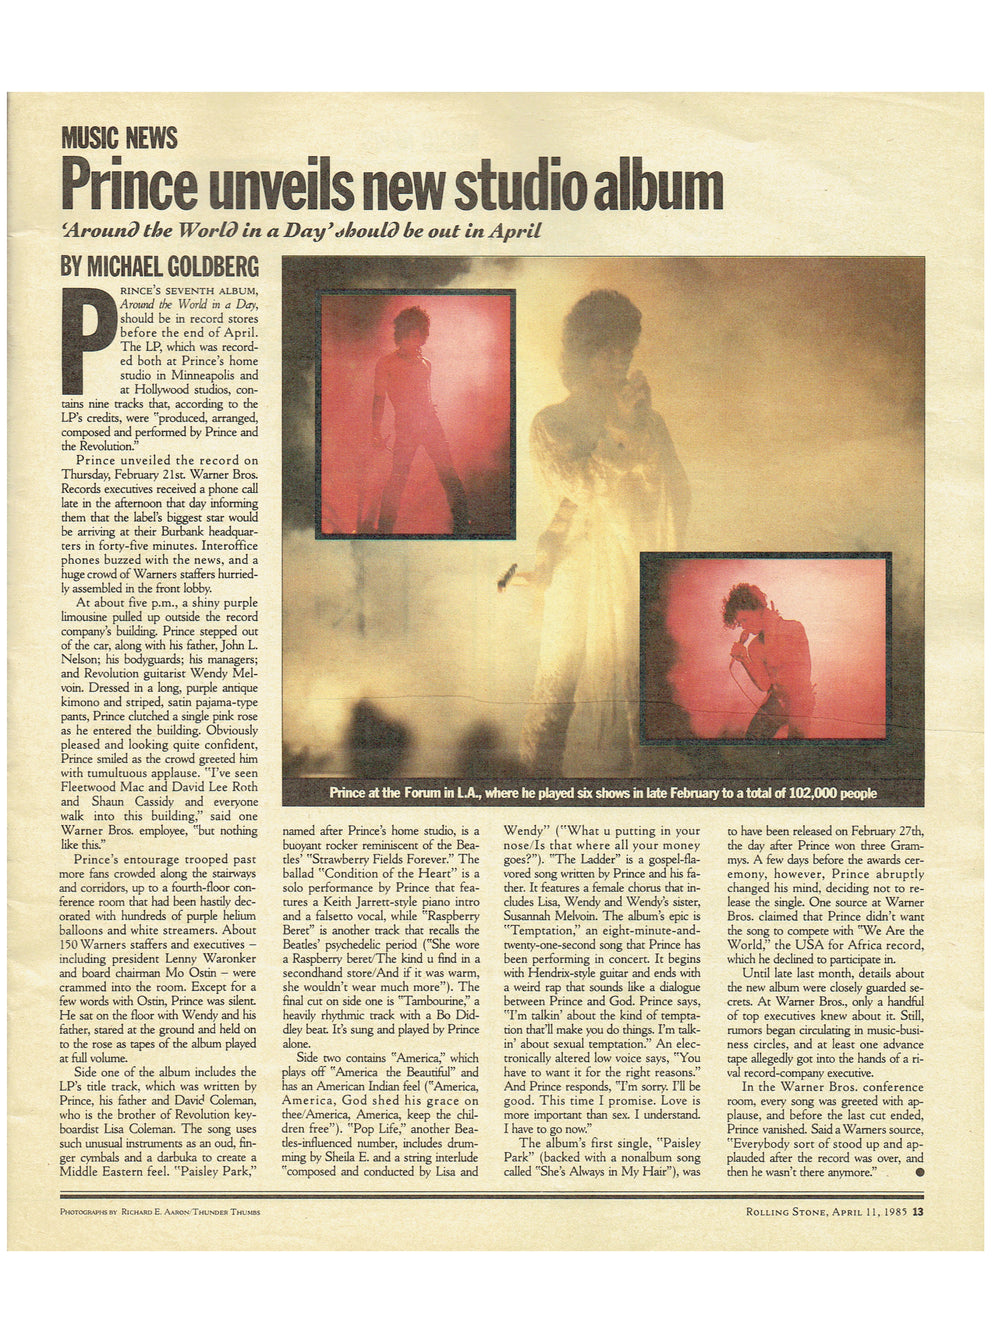 Prince – Rolling Stone Magazine April 11th 1985 Prince 1 Page Article New Album